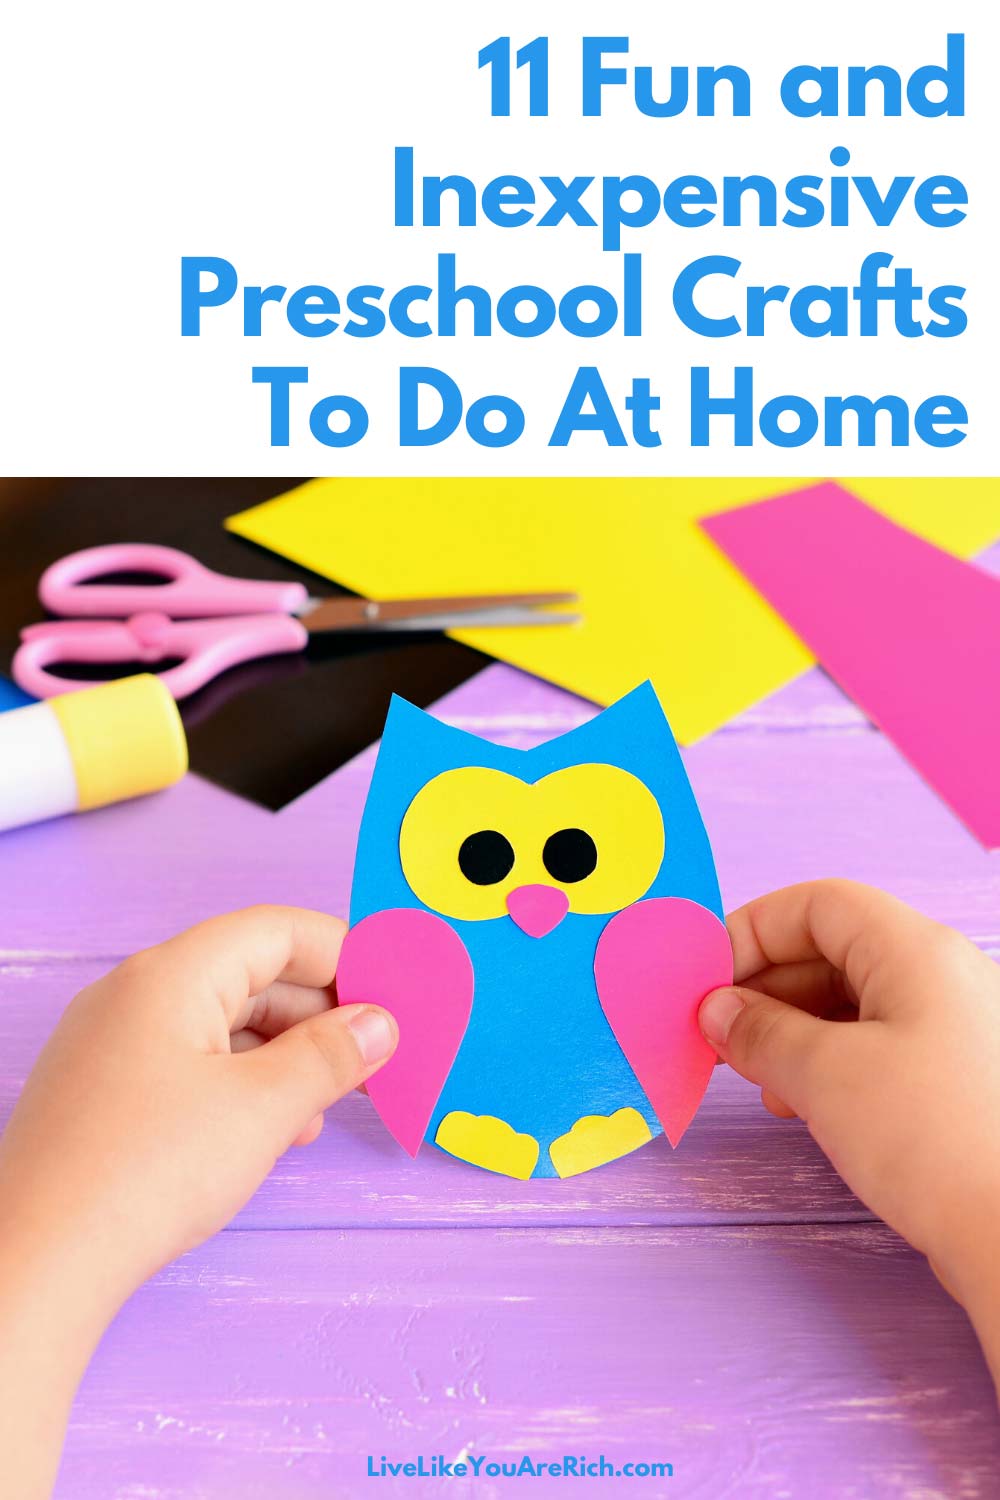 Looking for fun preschool age crafts to do at home? Here are some great ones I've rounded up. They are simple, inexpensive, and fun for kids ages 2-5. #crafts #kidsactivities #activitiesforkids 